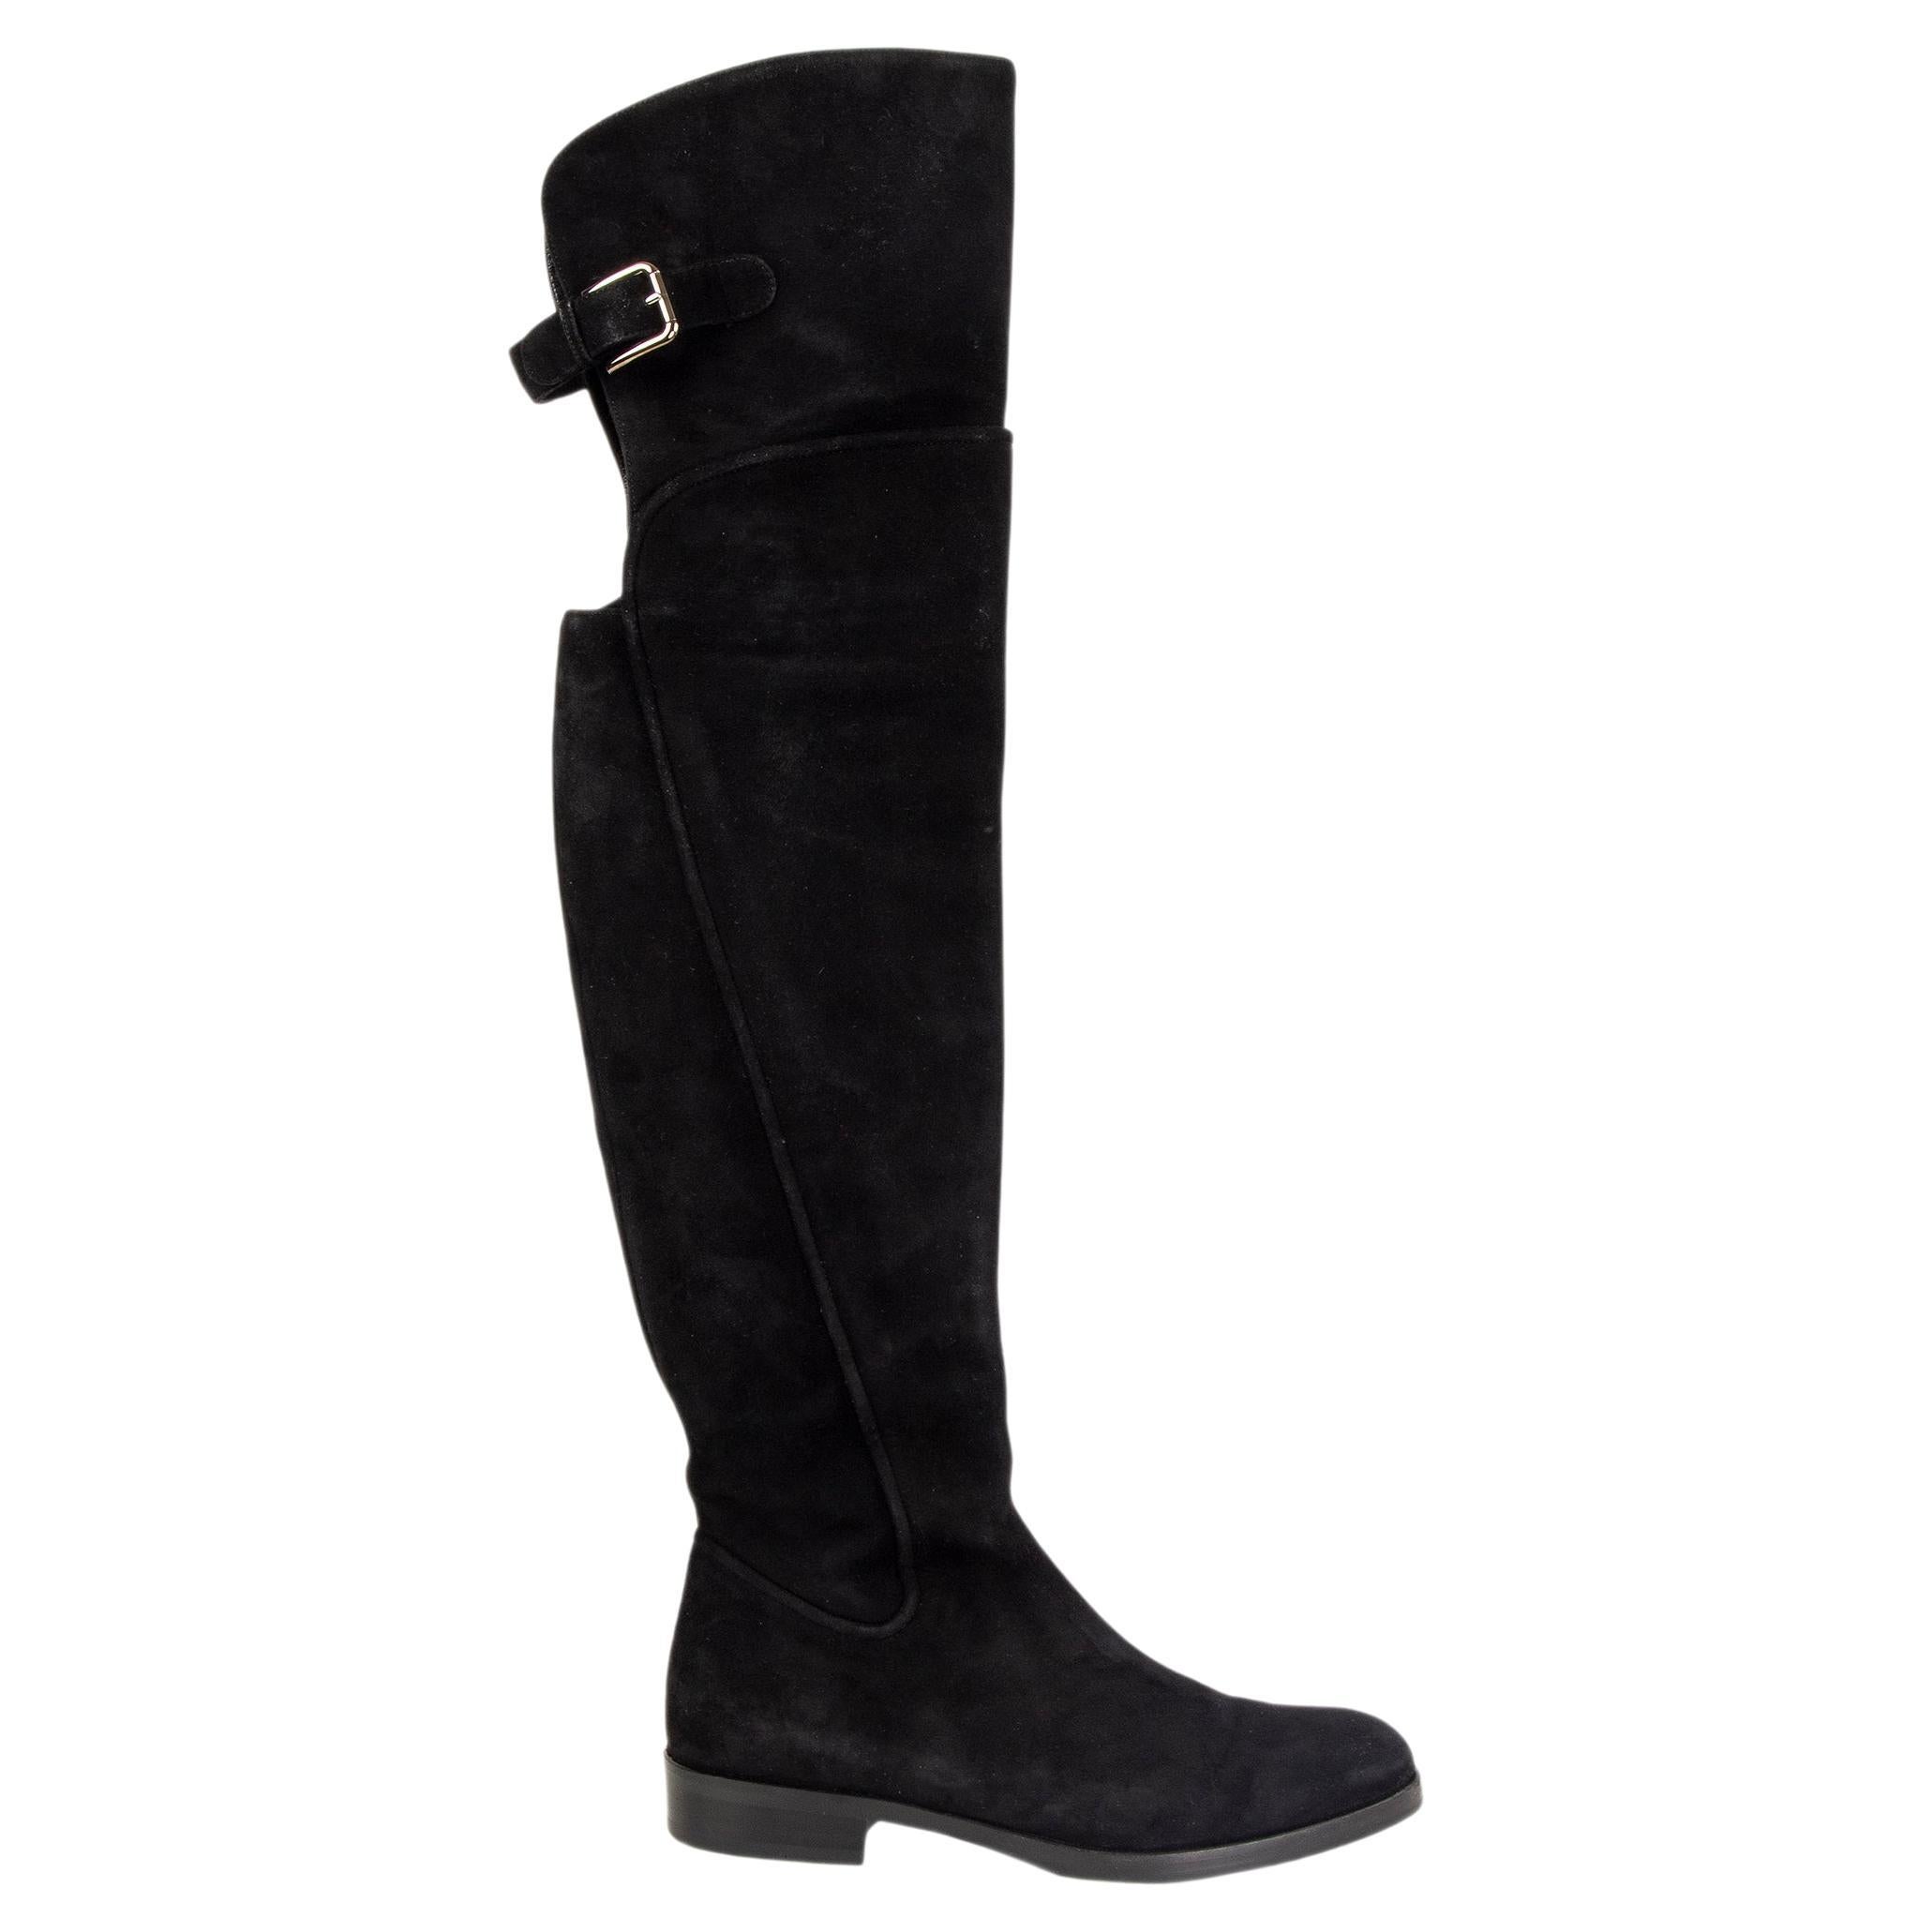 DOLCE & GABBANA black suede FLAT OVER THE KNEE Boots Shoes 38